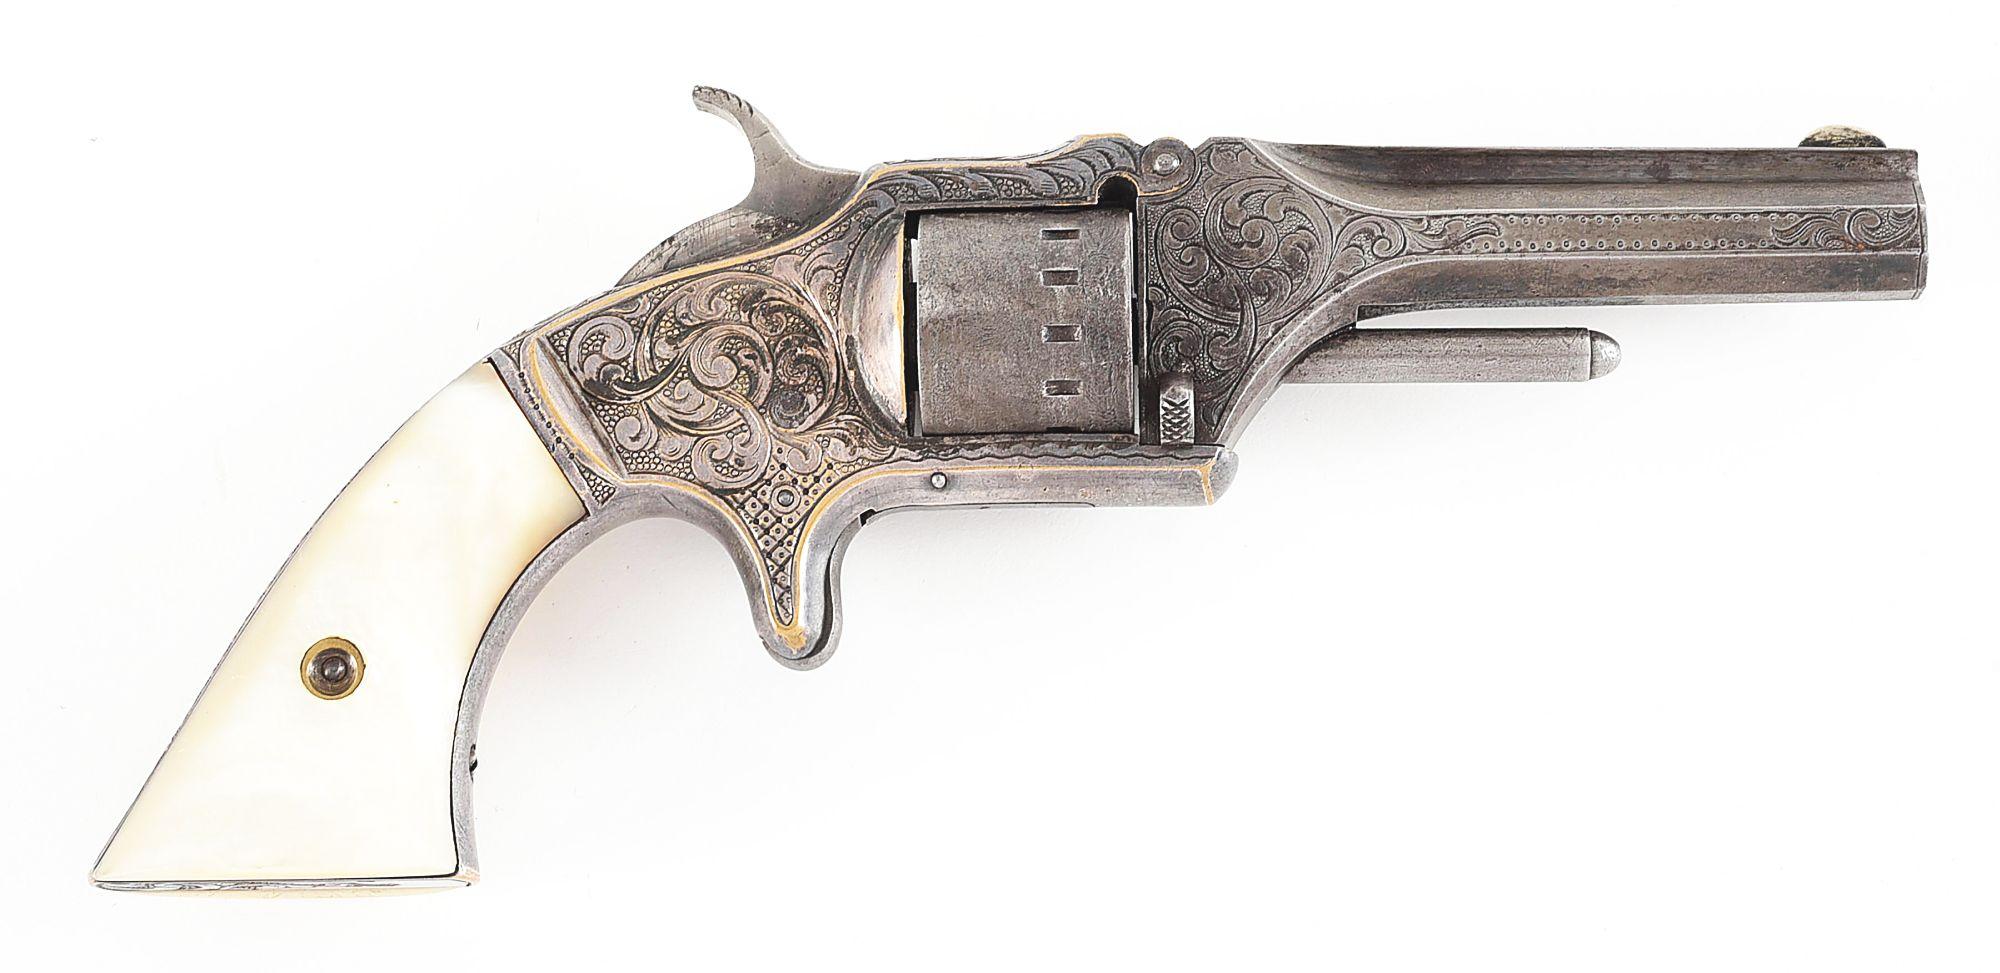 (A) FACTORY ENGRAVED AMERICAN STANDARD TOOL CO. POCKET REVOLVER.